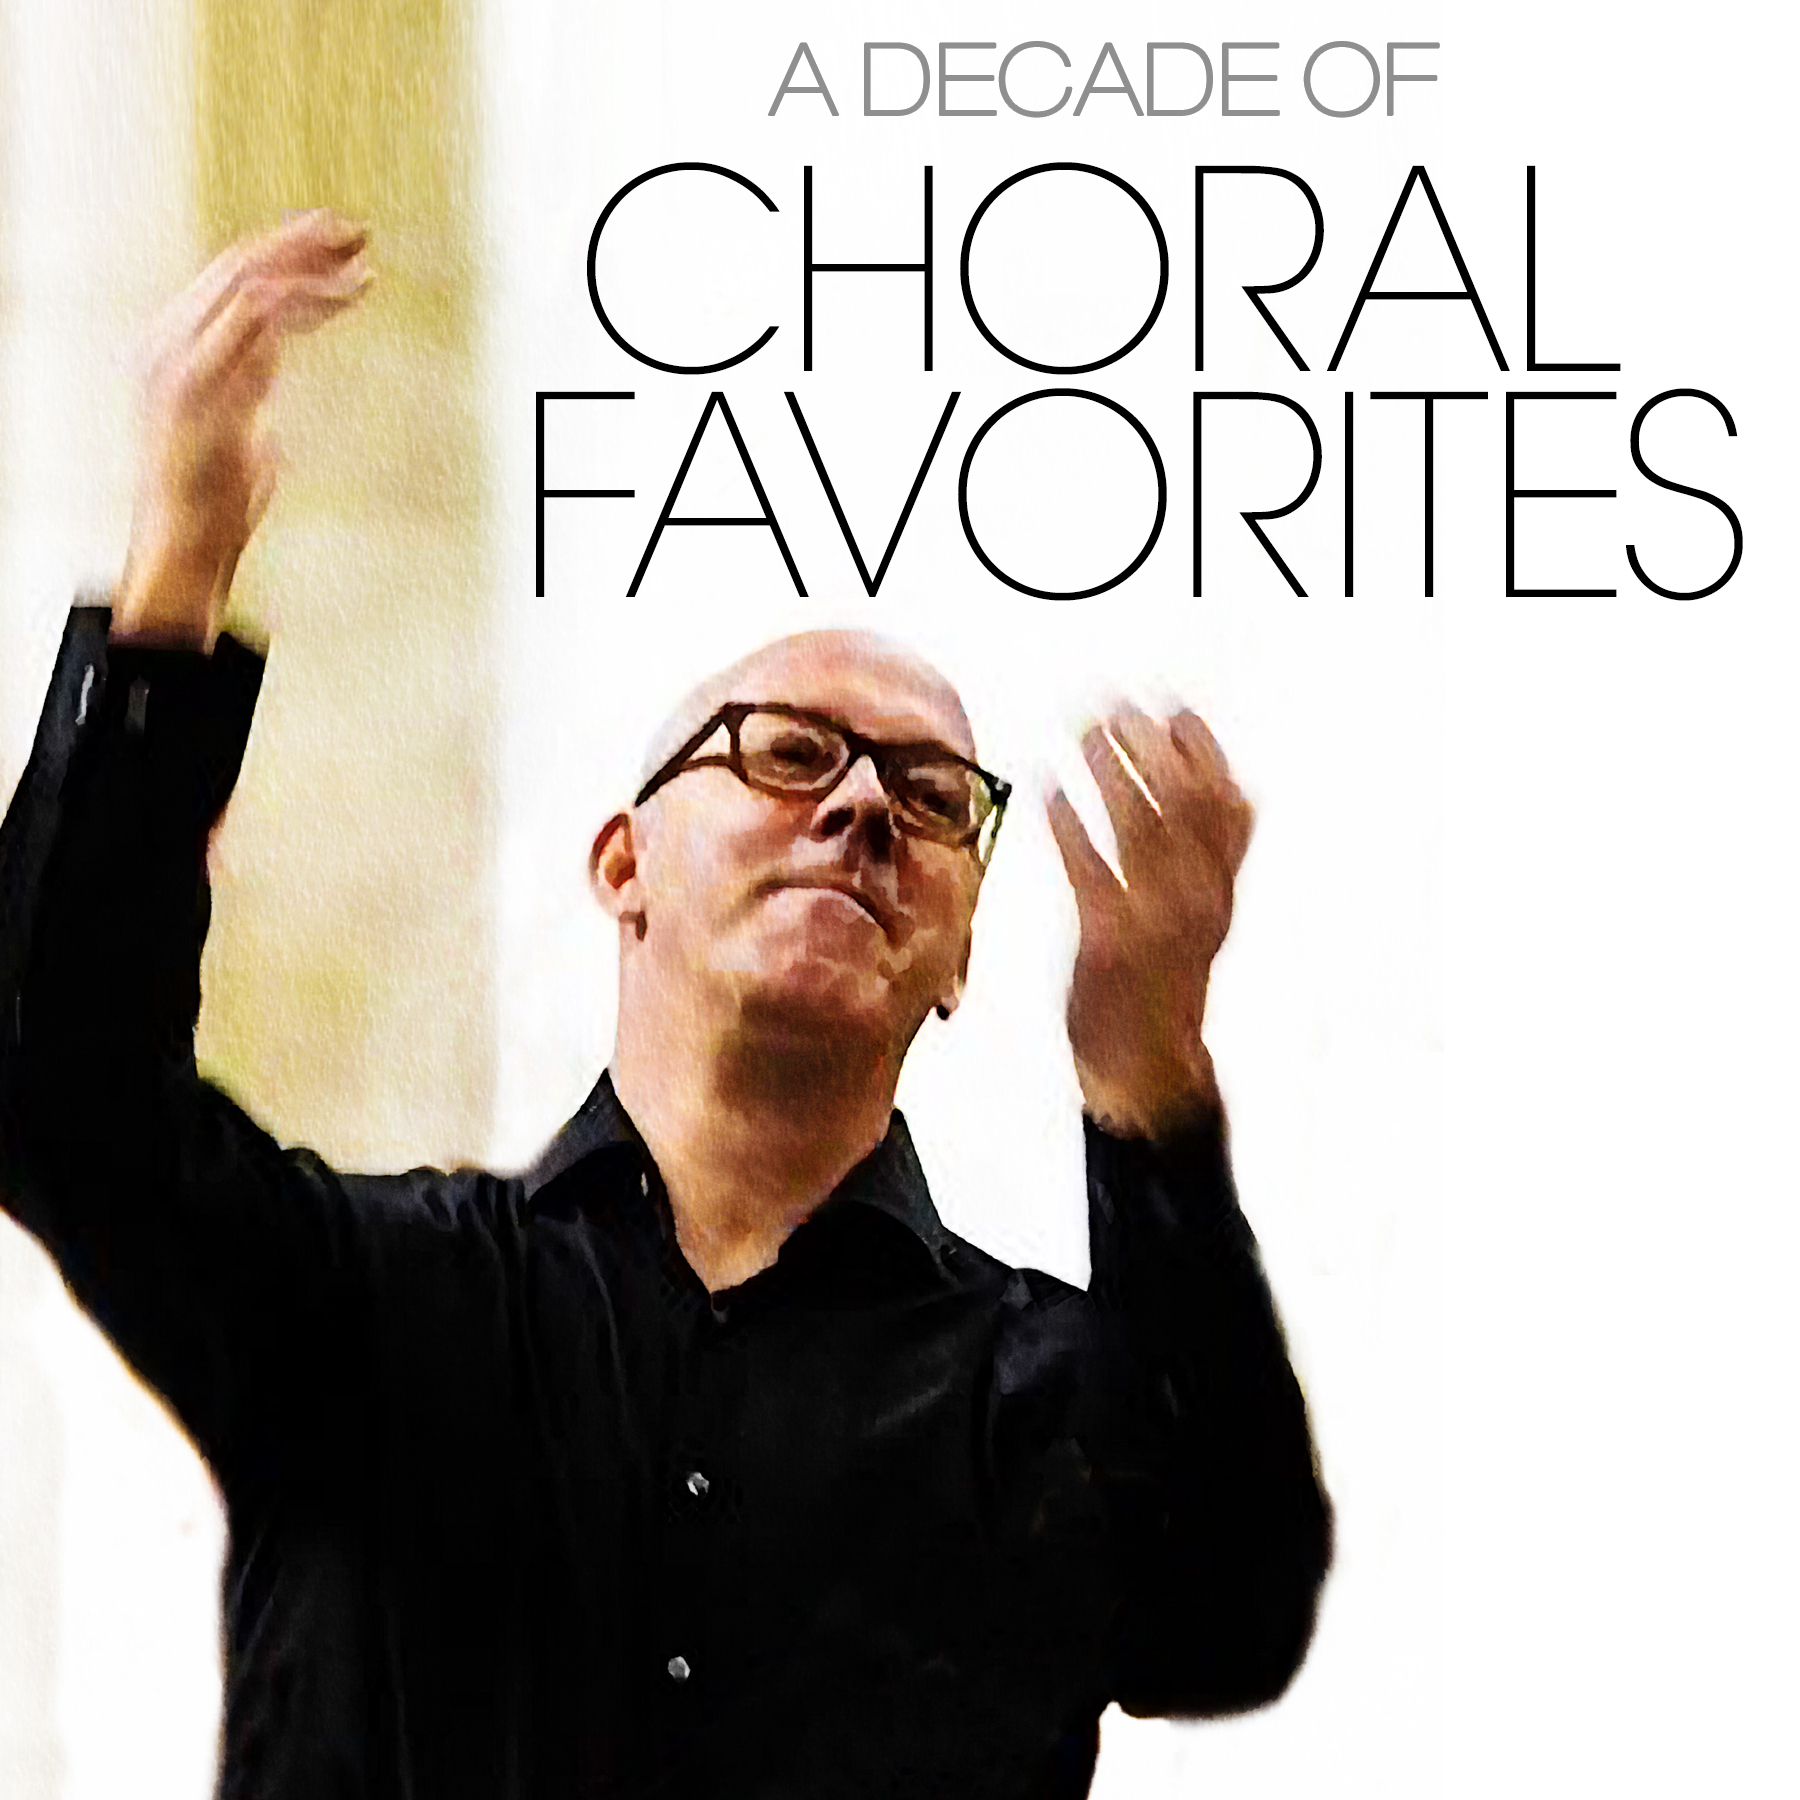 A Decade of Choral Favorites